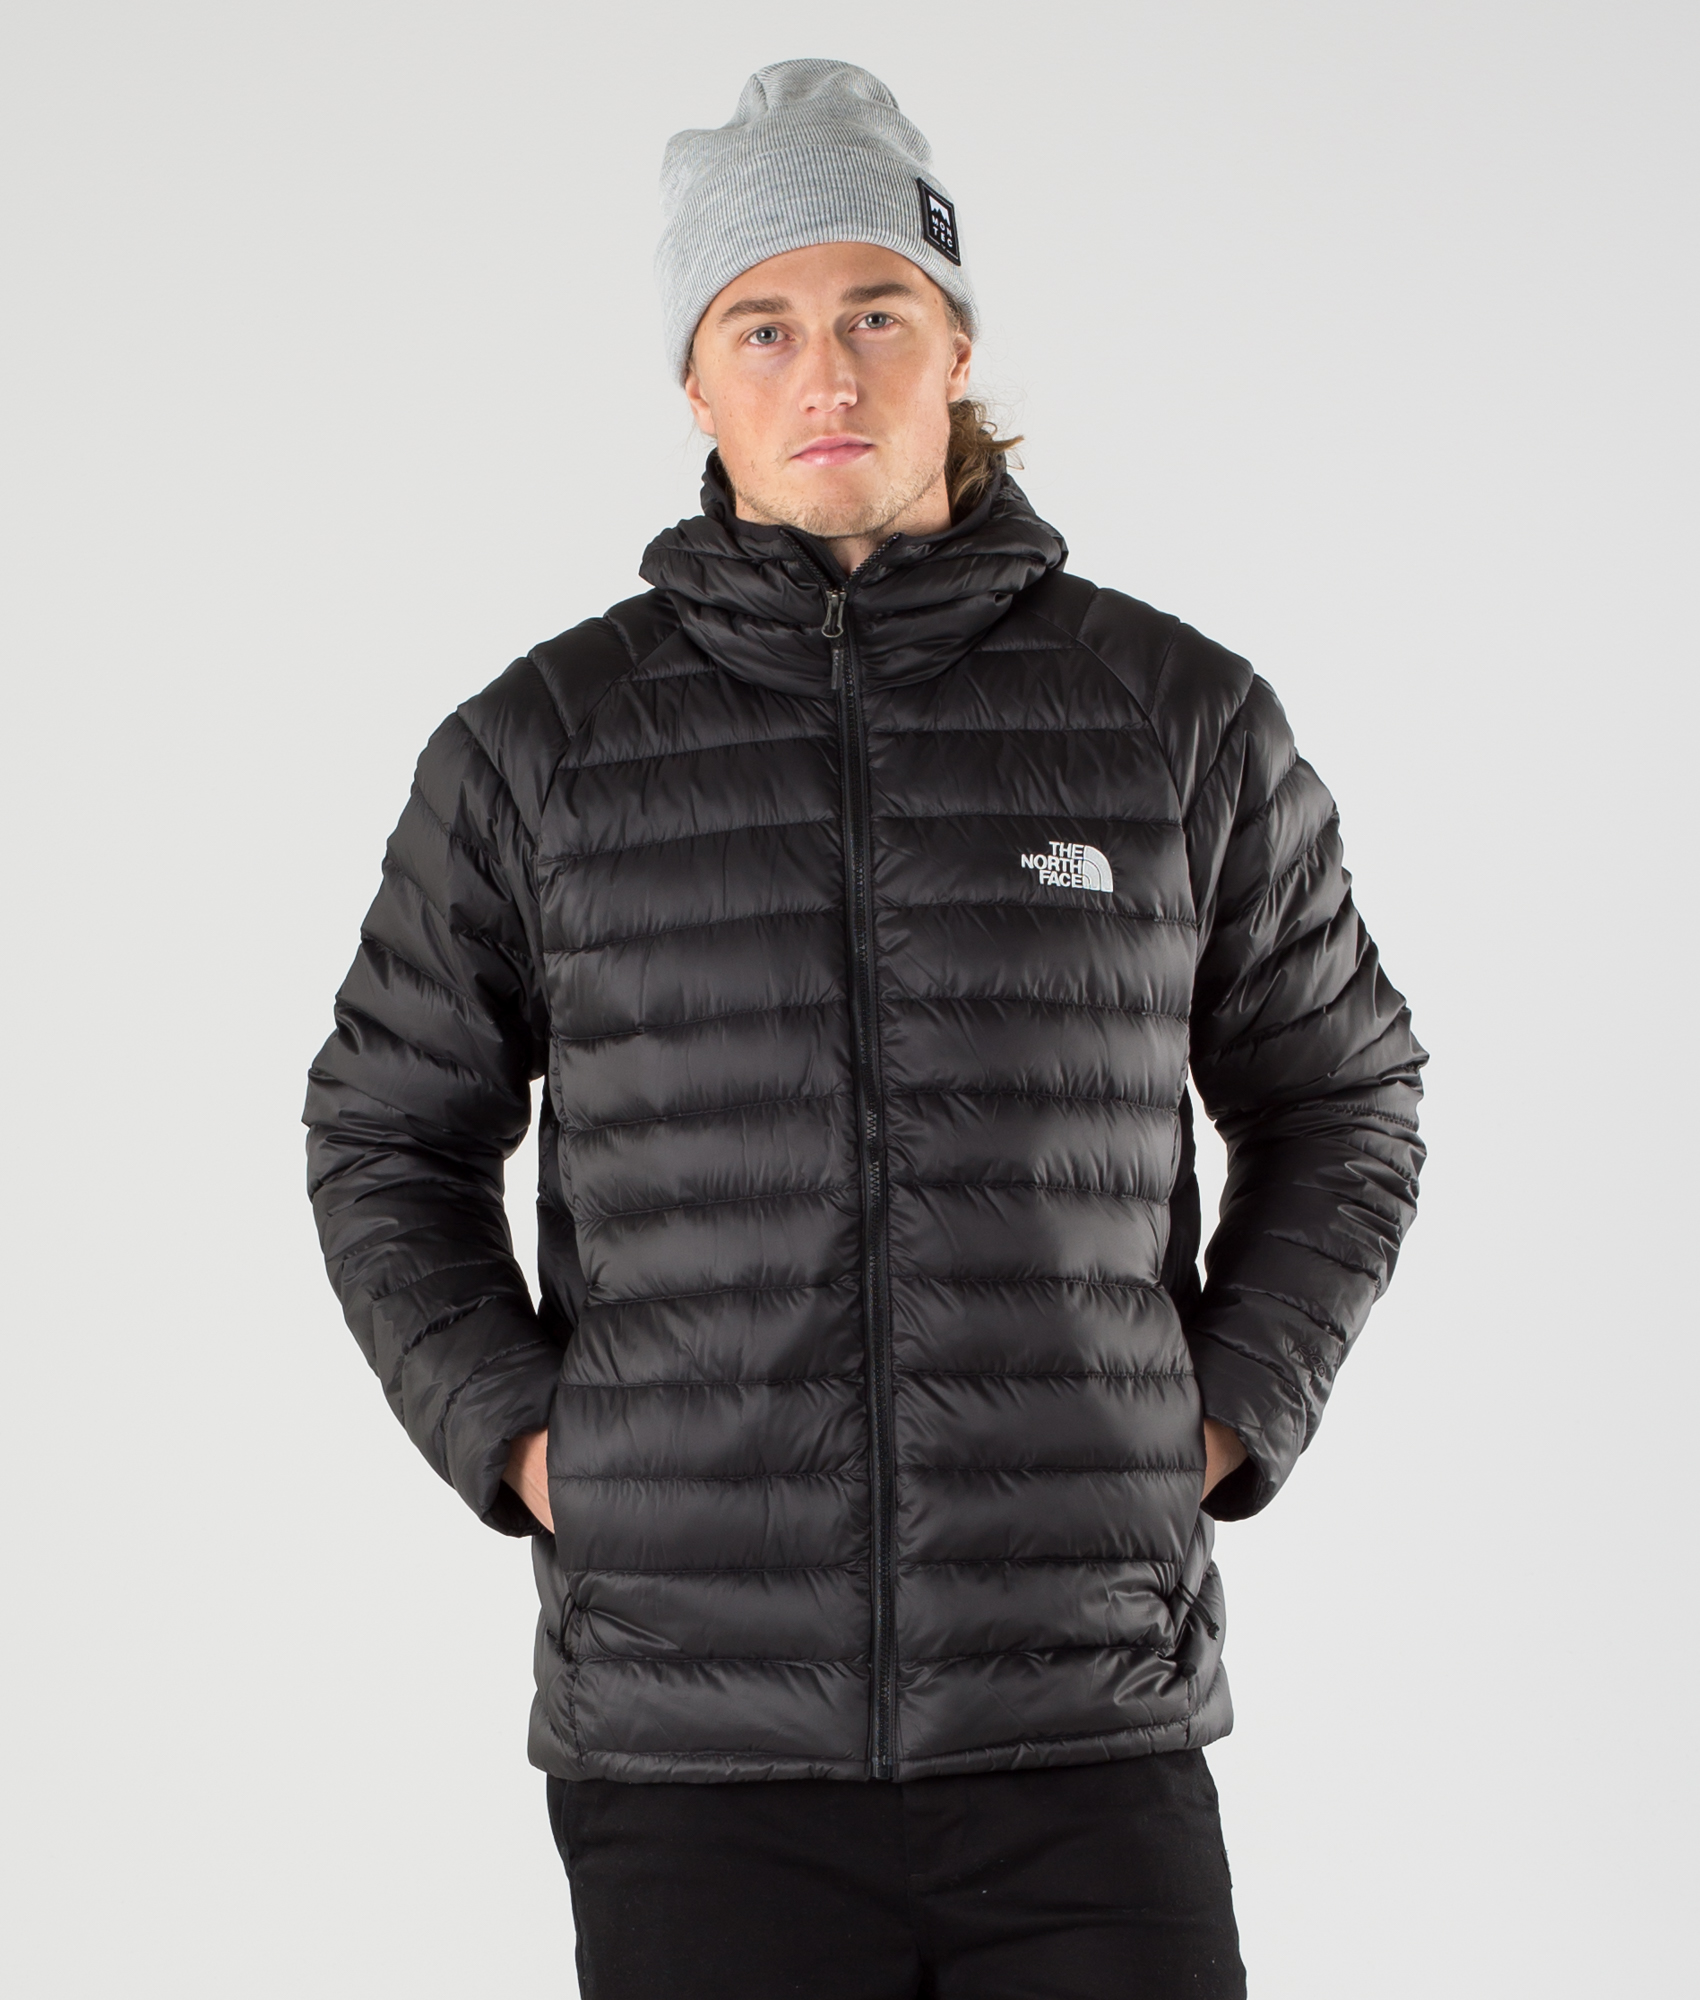 north face jacket trevail